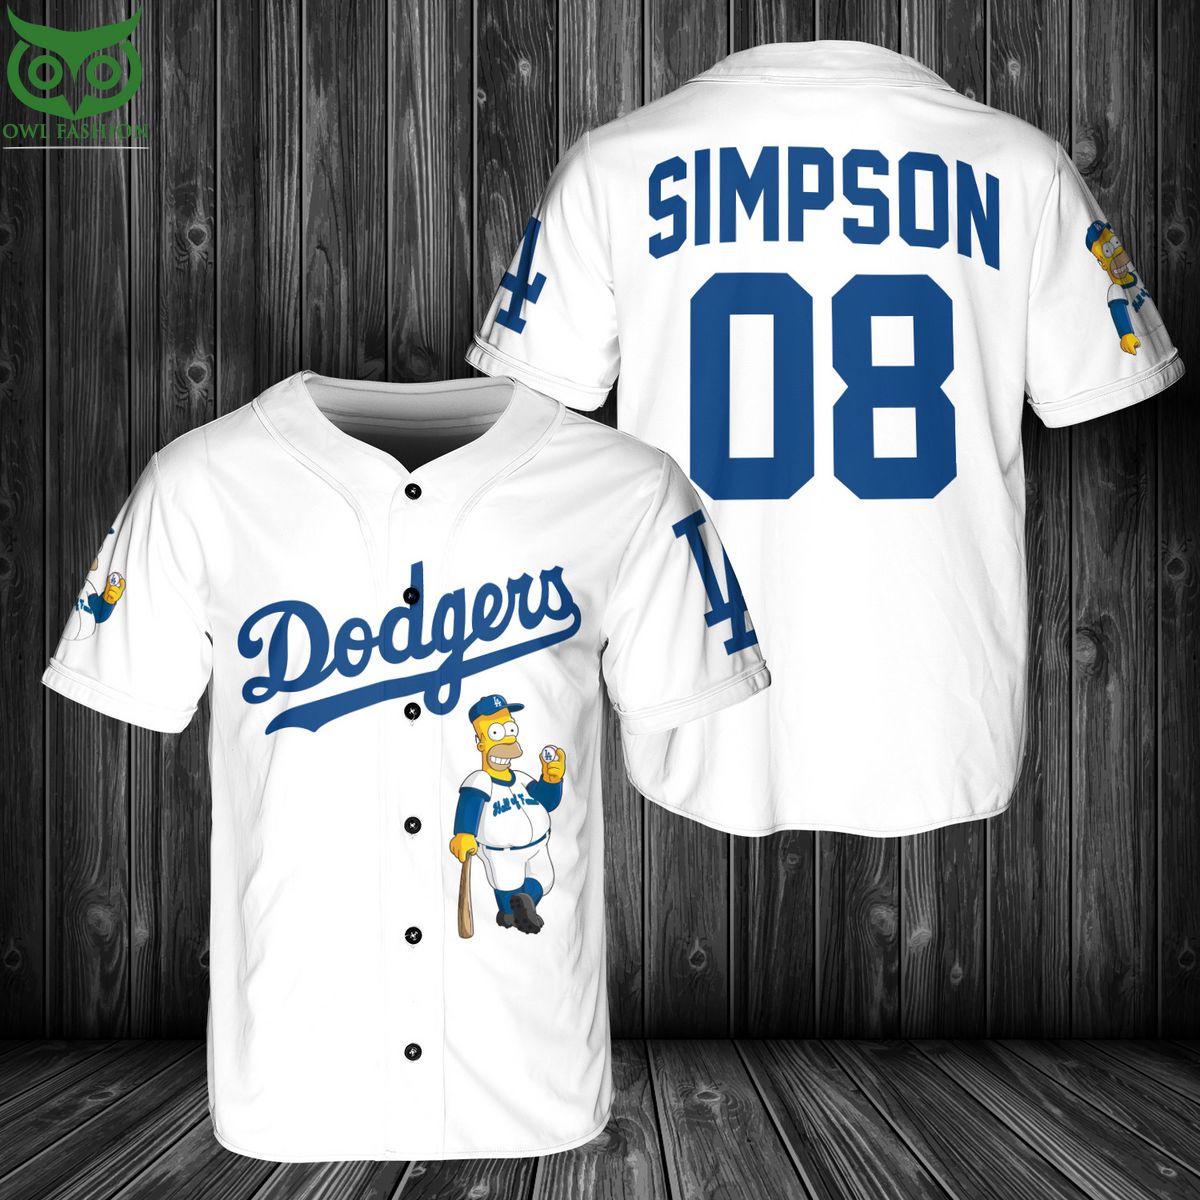 Los Angeles Dodgers MLB Simpson Baseball Jersey This is awesome and unique